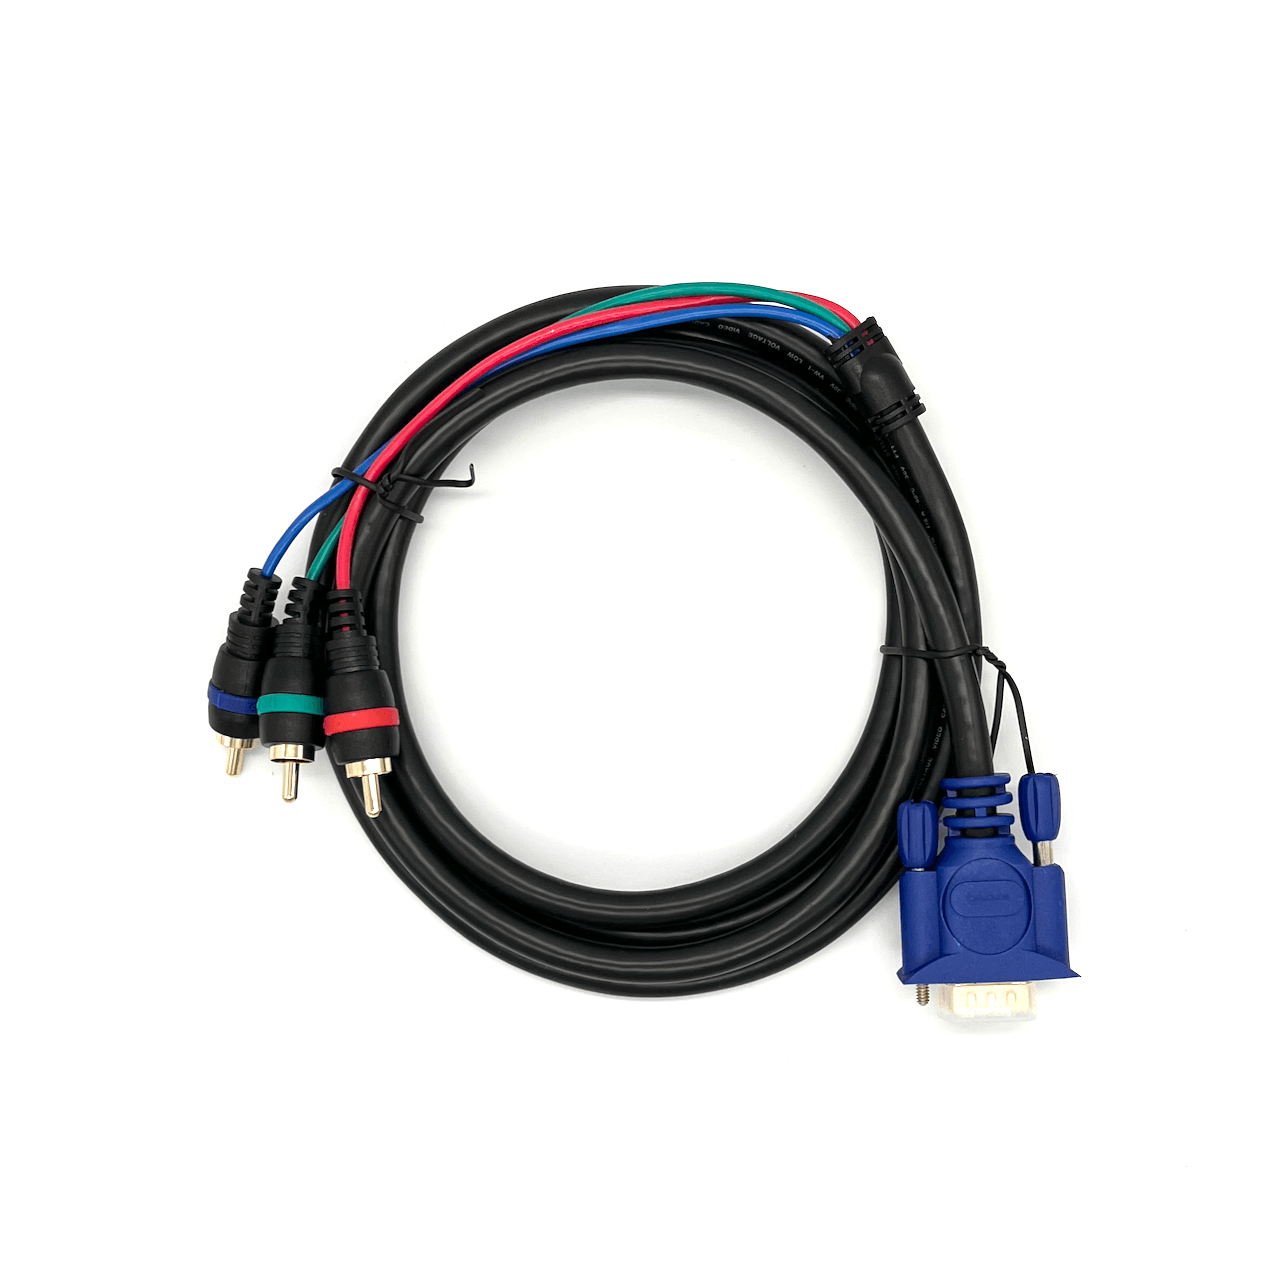 VGA to YPbPr Video Cable